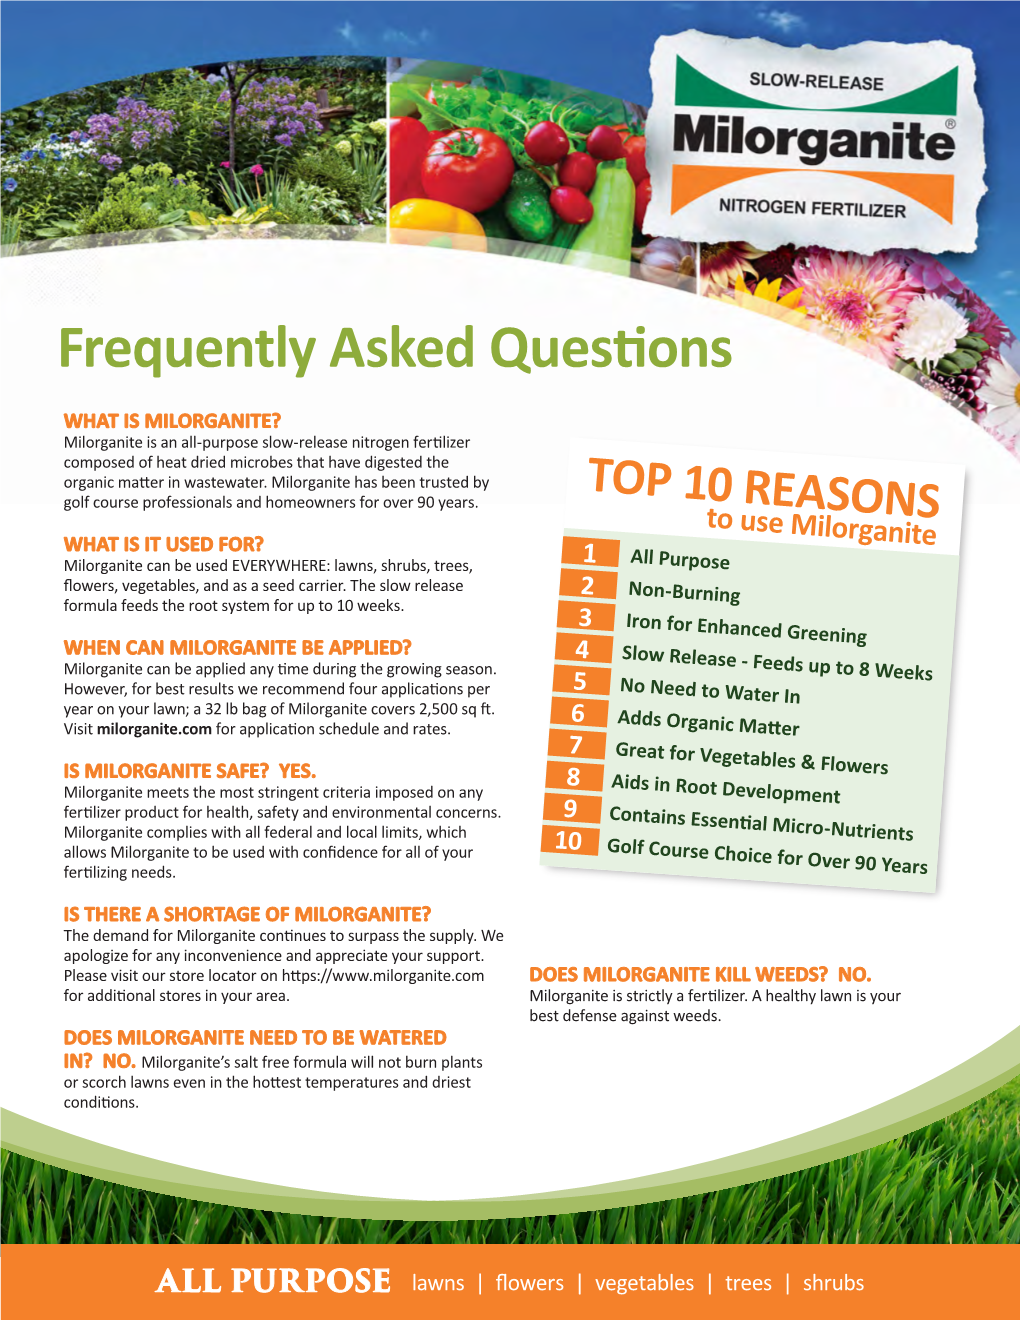 Milorganite Fertilizer Frequently Asked Questions Sheet